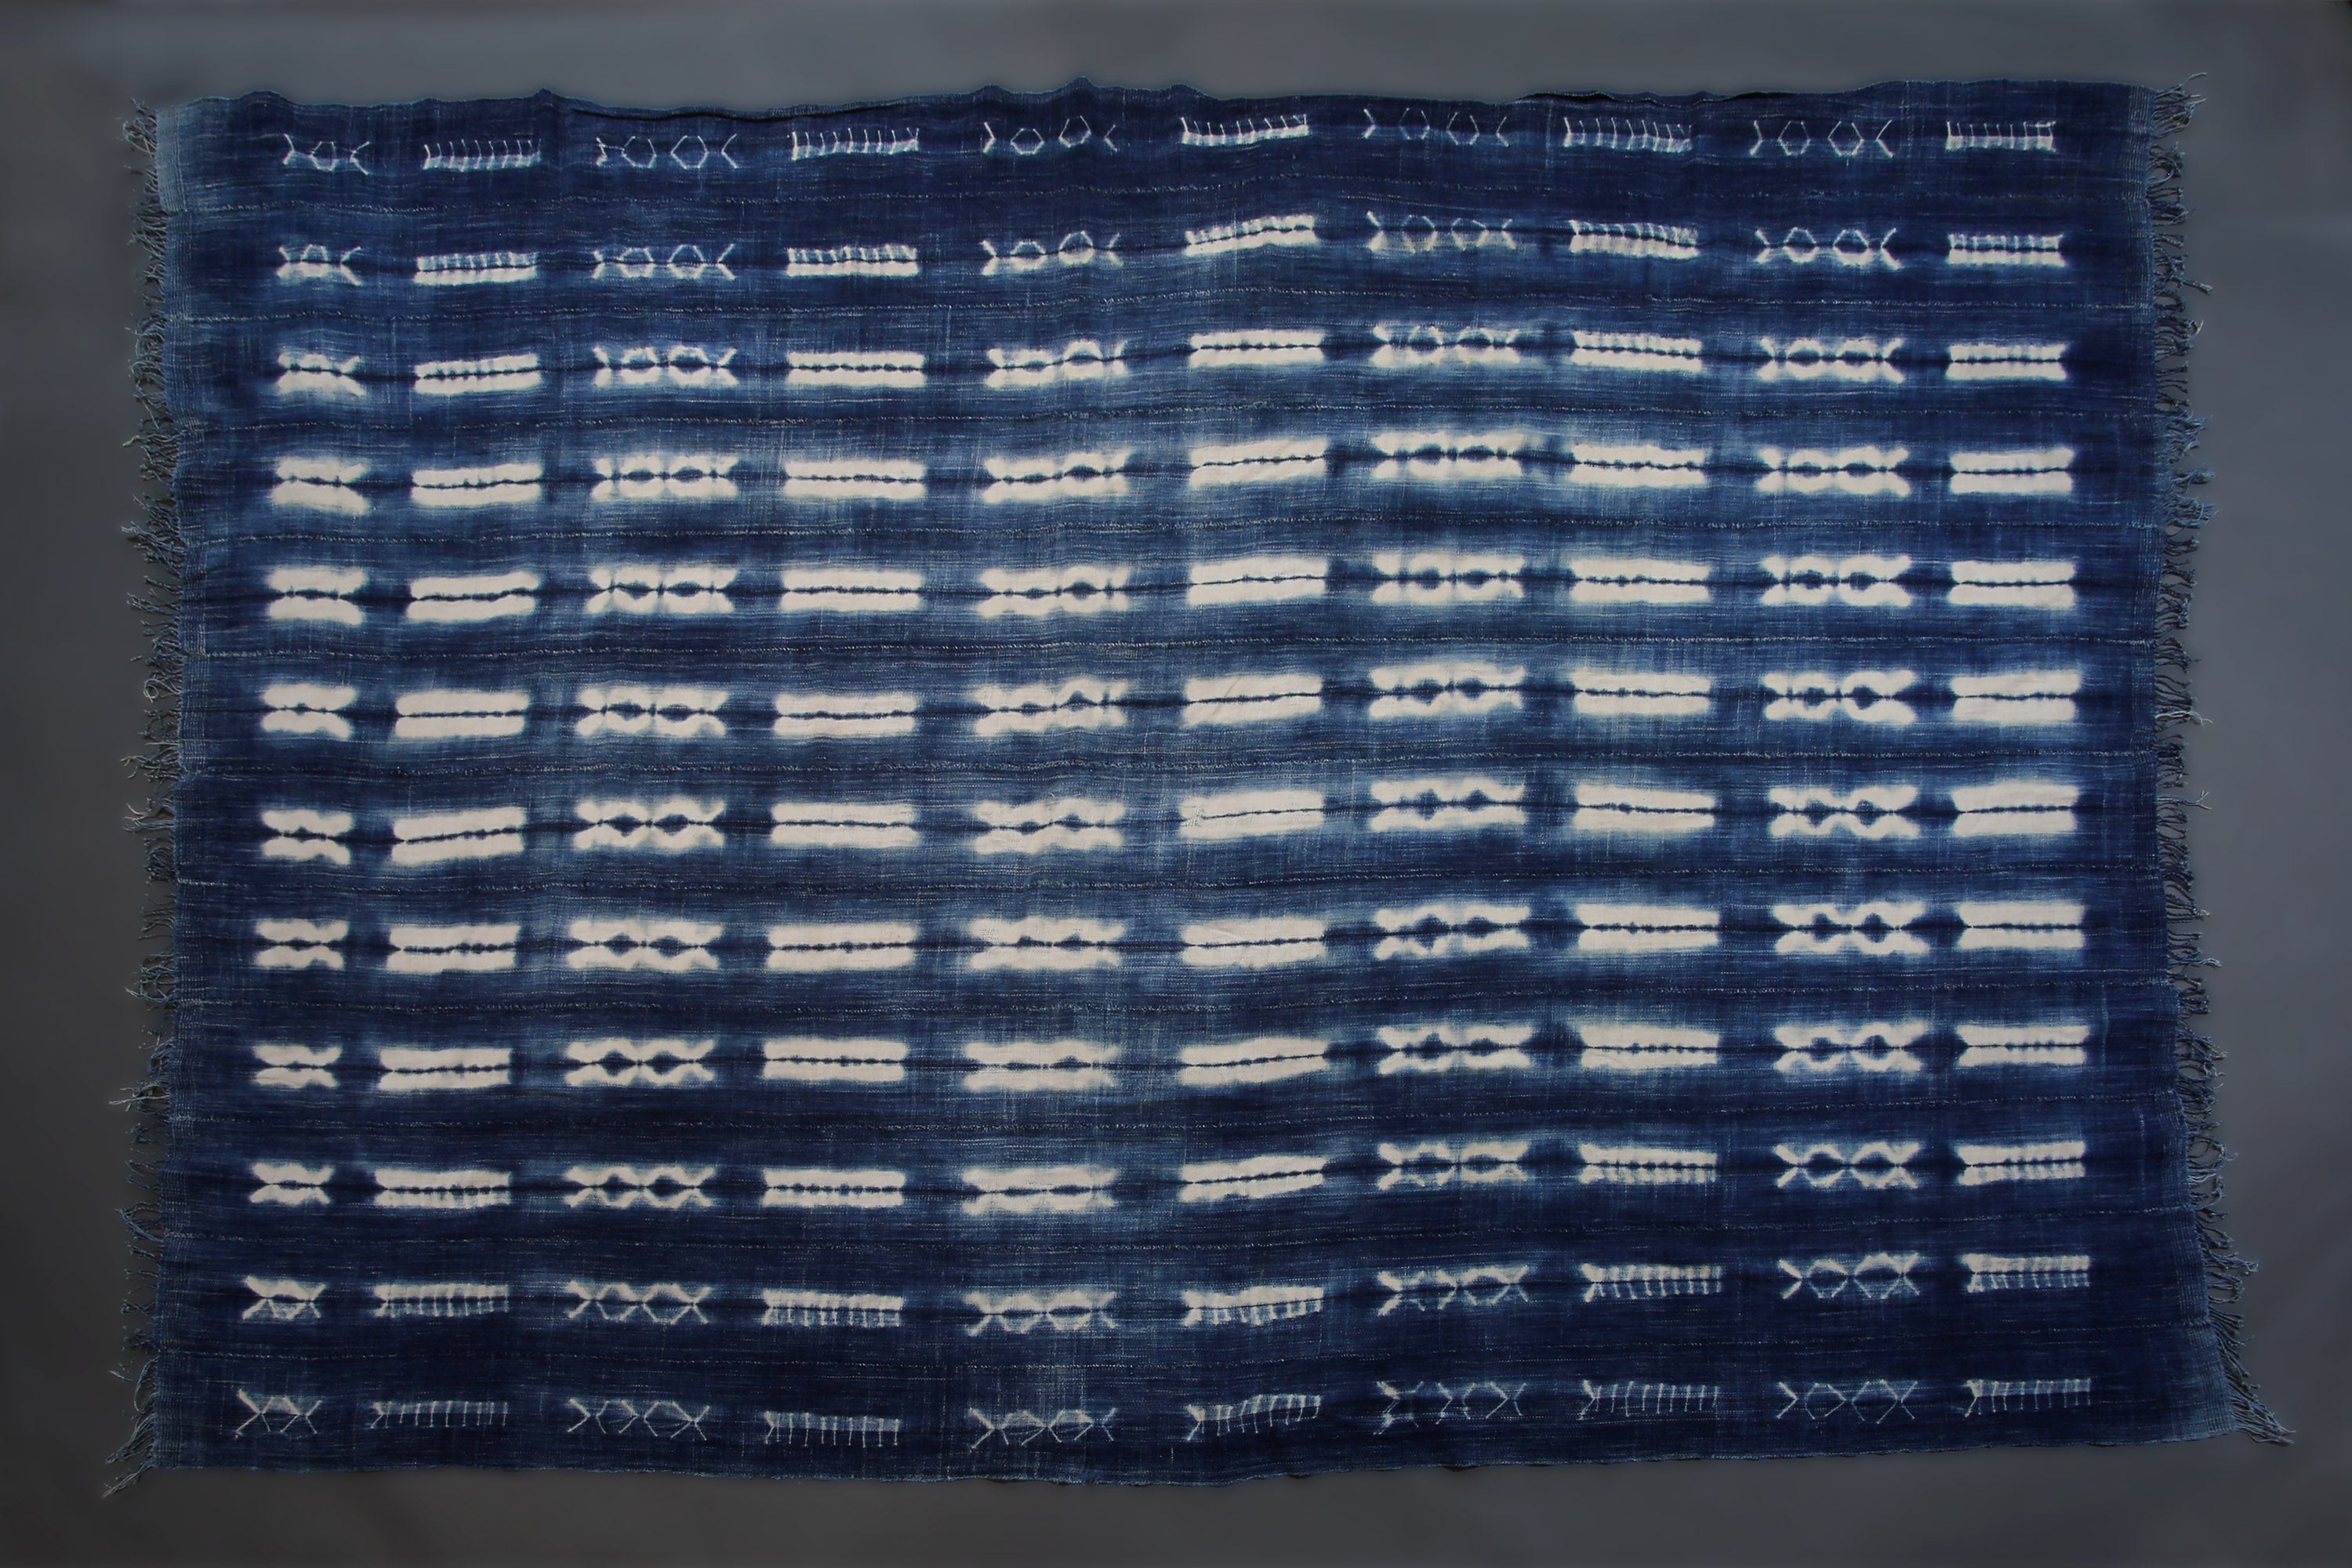 Handcrafted Textiles - Artisan Designed - Handcrafted African Art Textiles - Home Decor - Living Spaces - Mix Colors - Bold Patterns - Traditional Designs - African Culture - This Dyed Indigo Blue White Vintage Cloth is perfect for home decor projects. It's made from a high-quality African Mossi cotton fabric tie-dyed with a Shibori Indigo dye. The blue and white pattern creates a stunning effect that will elevate any space. 74 